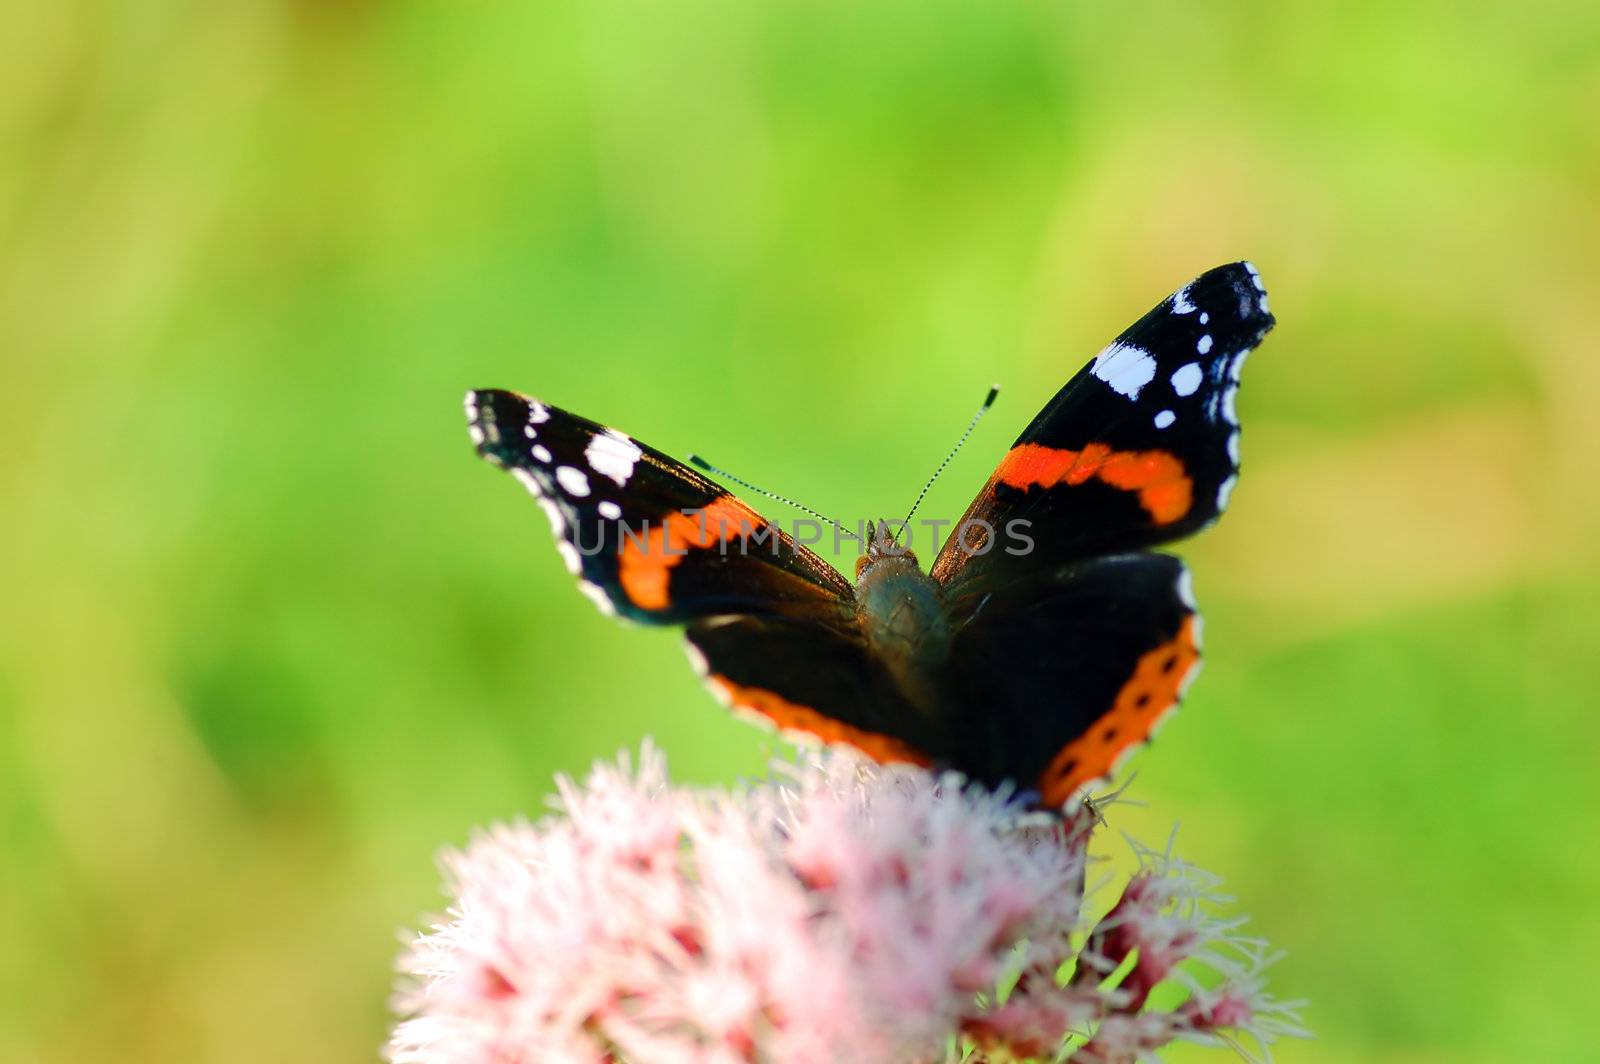 Bright image of beautiful BUTTERFLY sitting on flower ready to take off